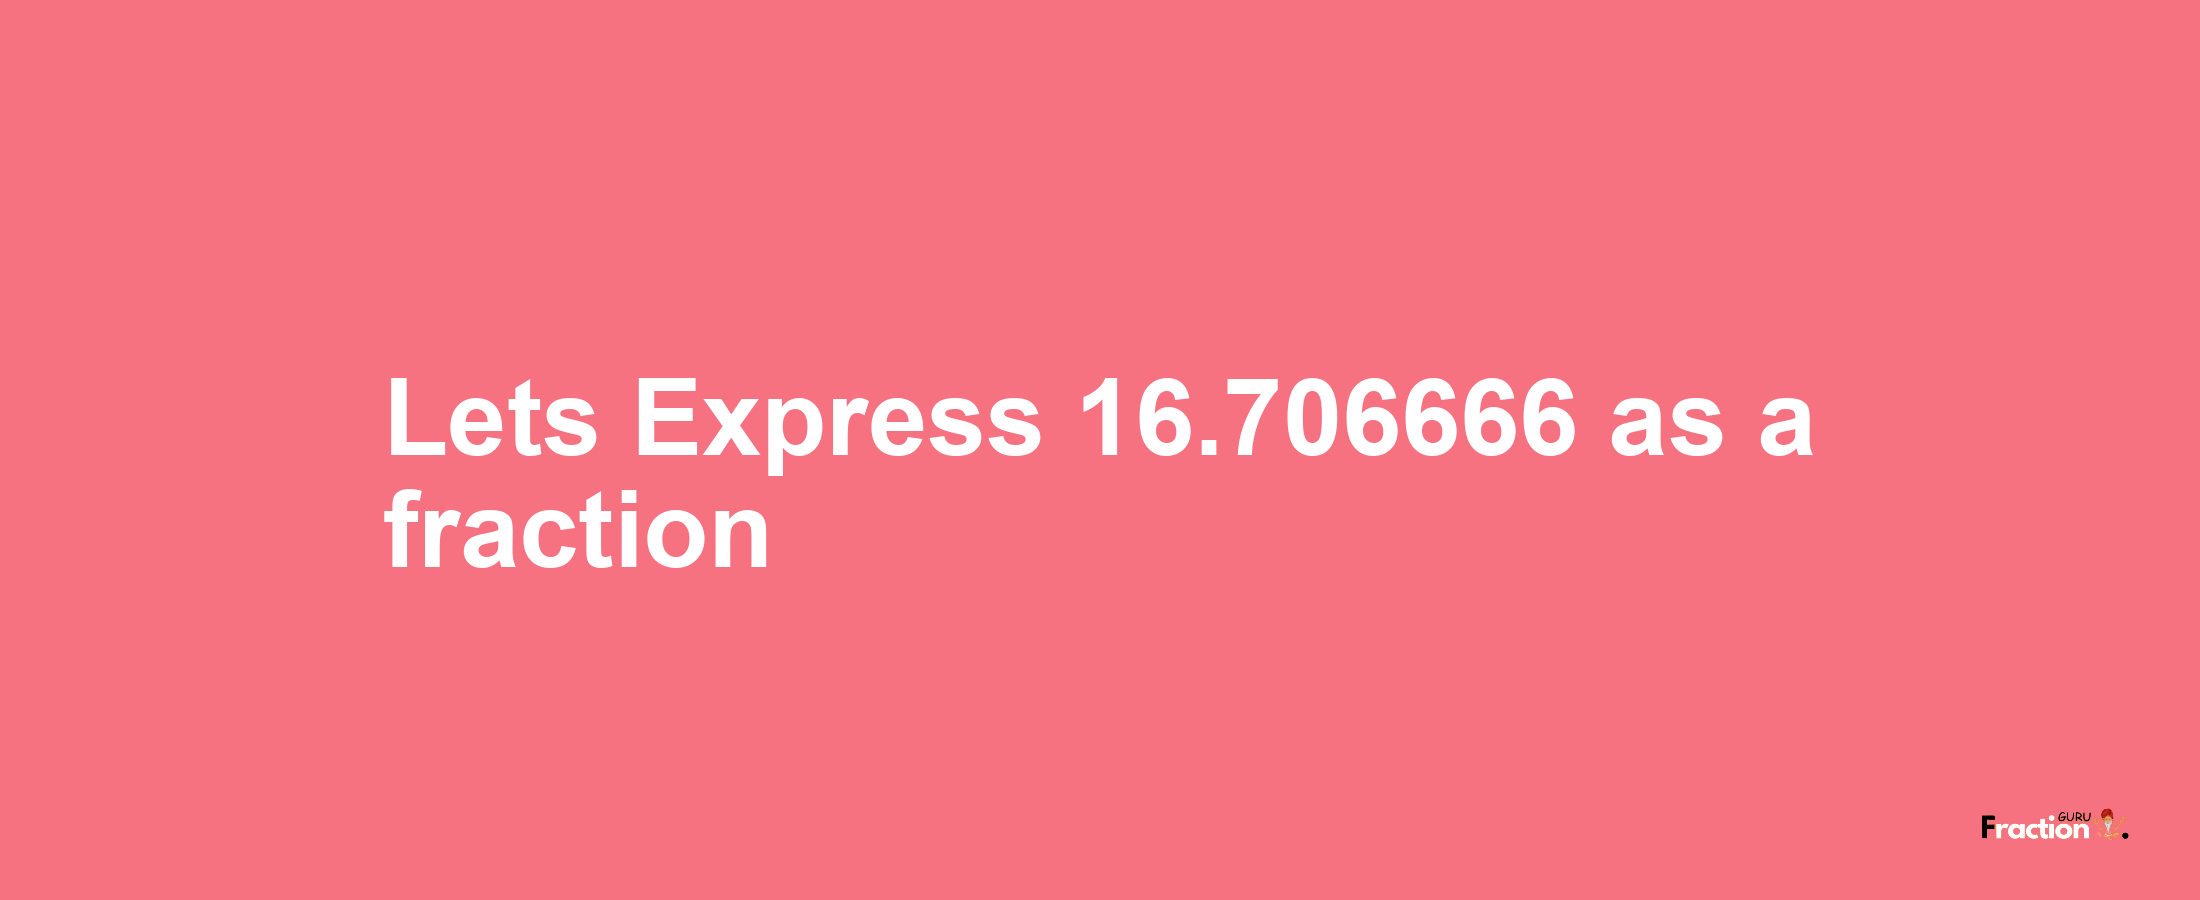 Lets Express 16.706666 as afraction